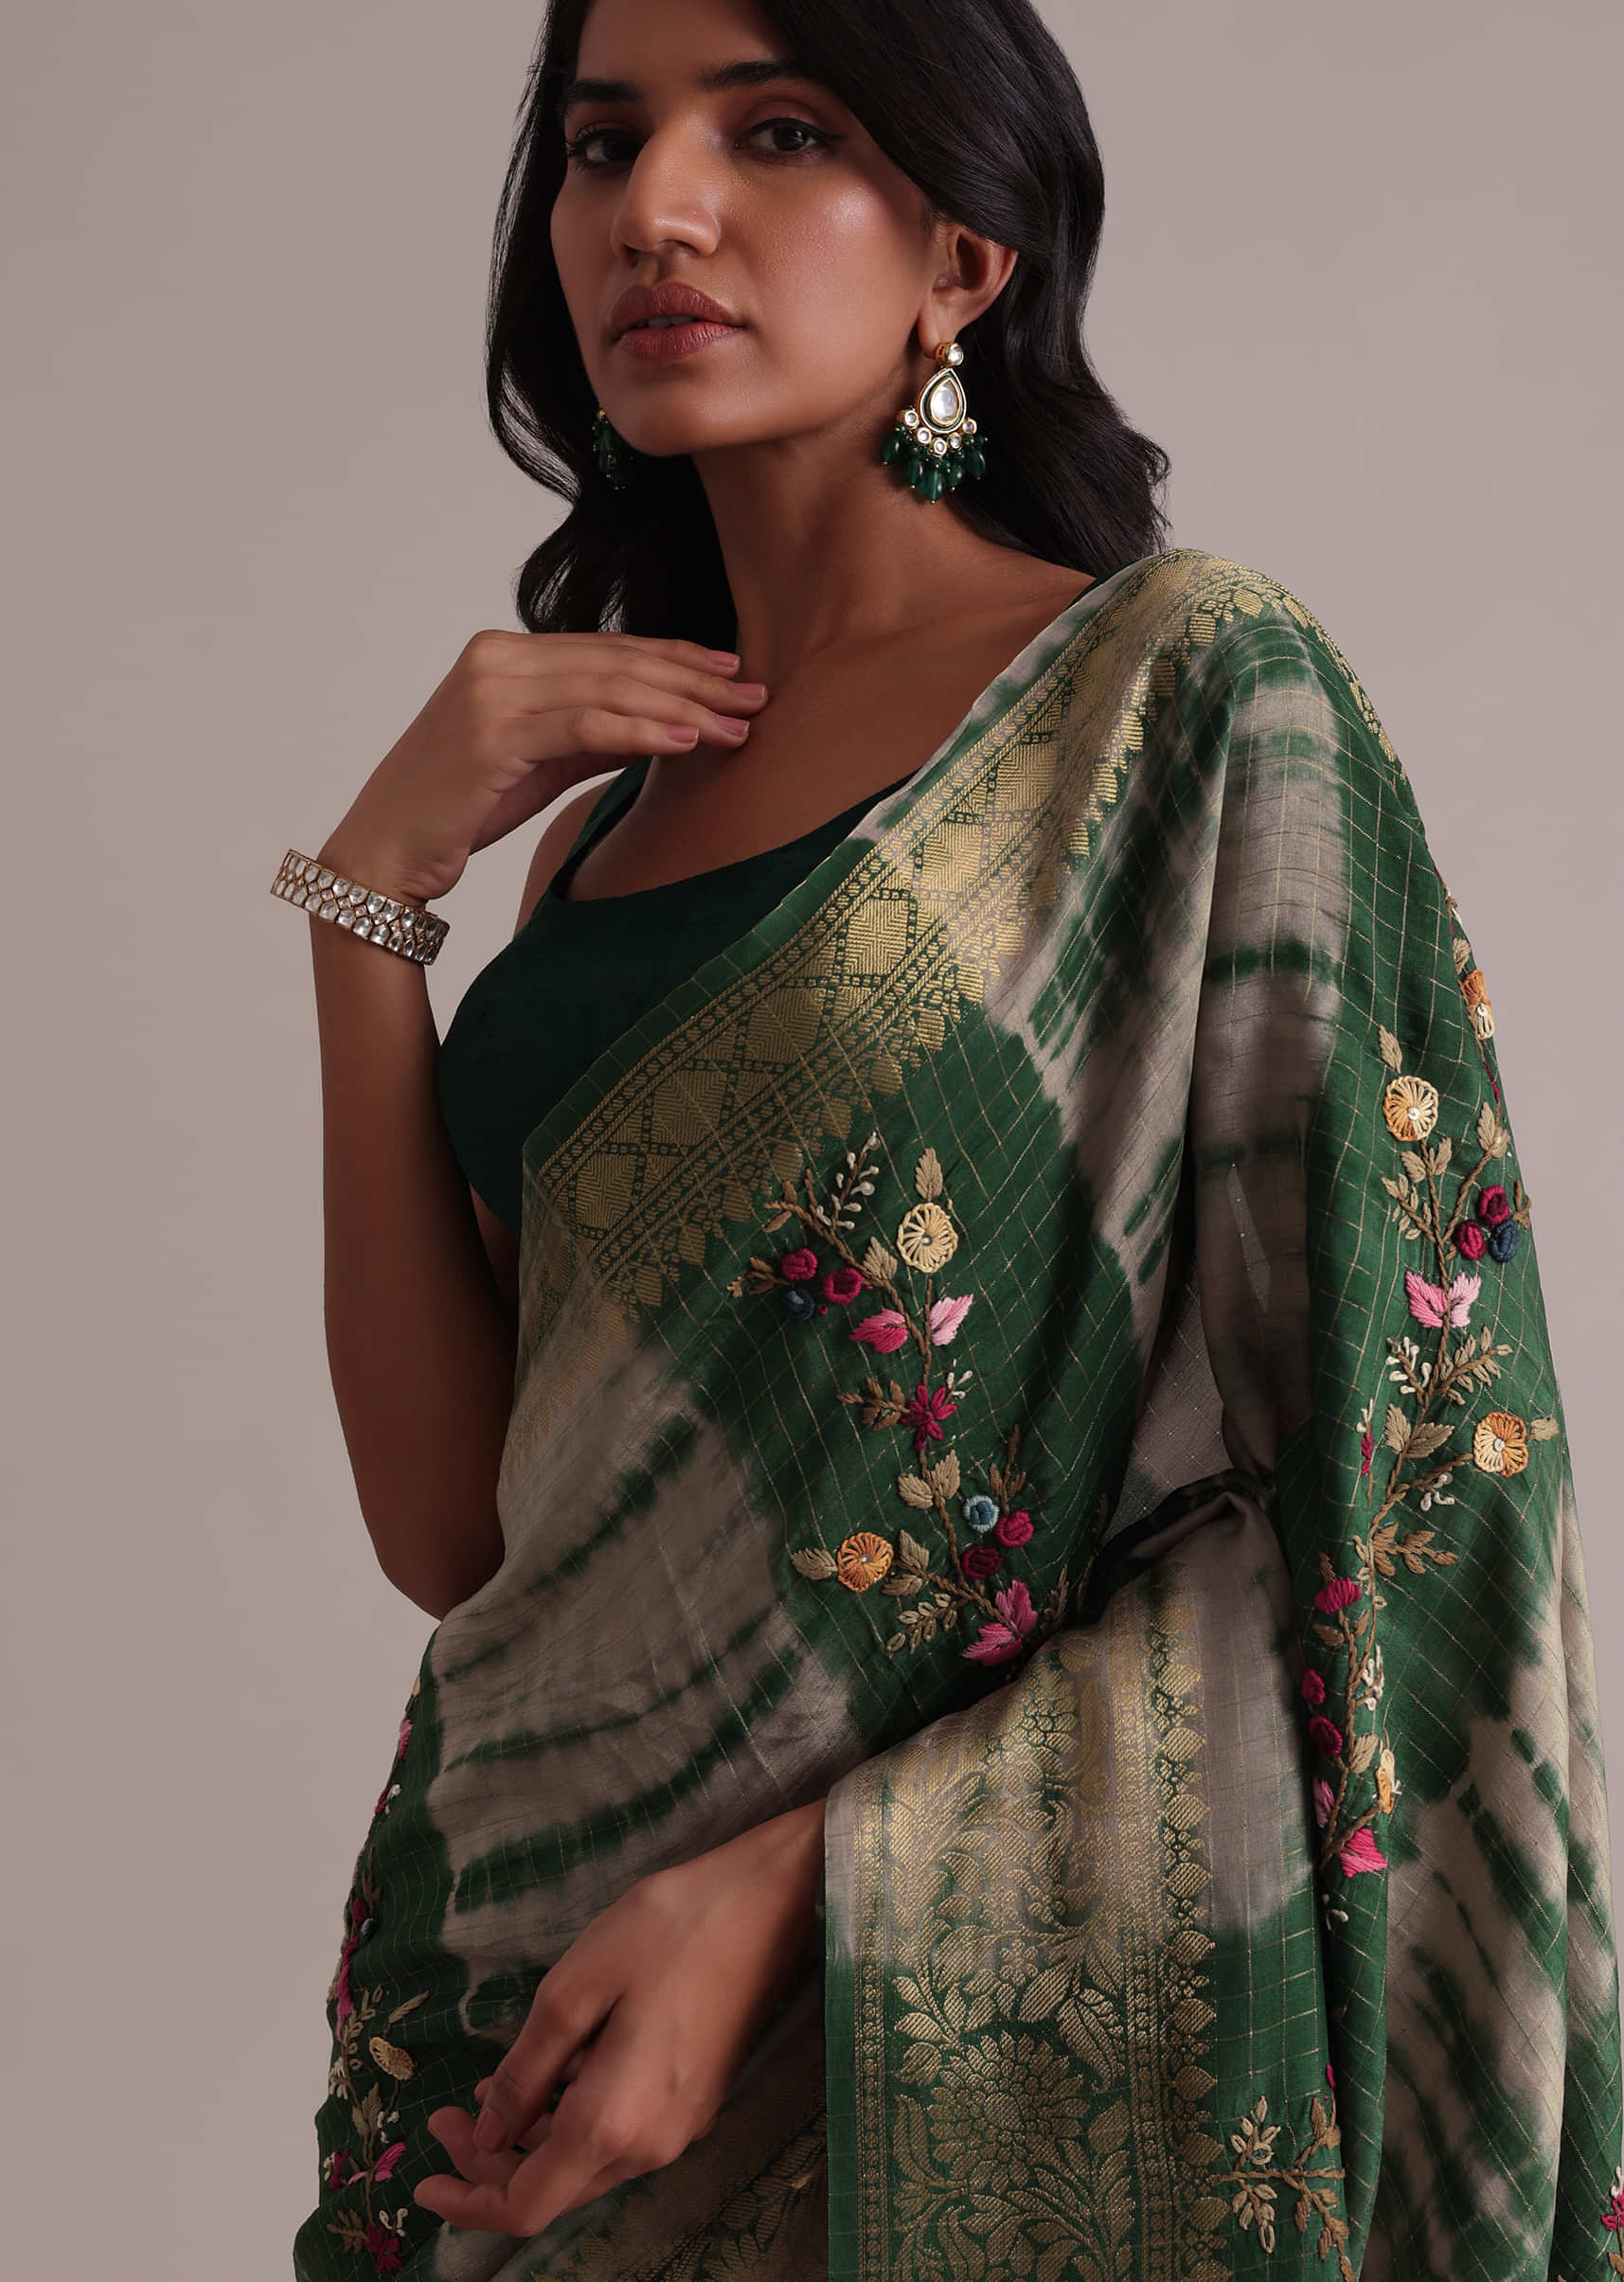 Dual-Tone Beige And Green Ombre Shibori Saree With Resham 3D Bud Embroidery In Dola Crepe